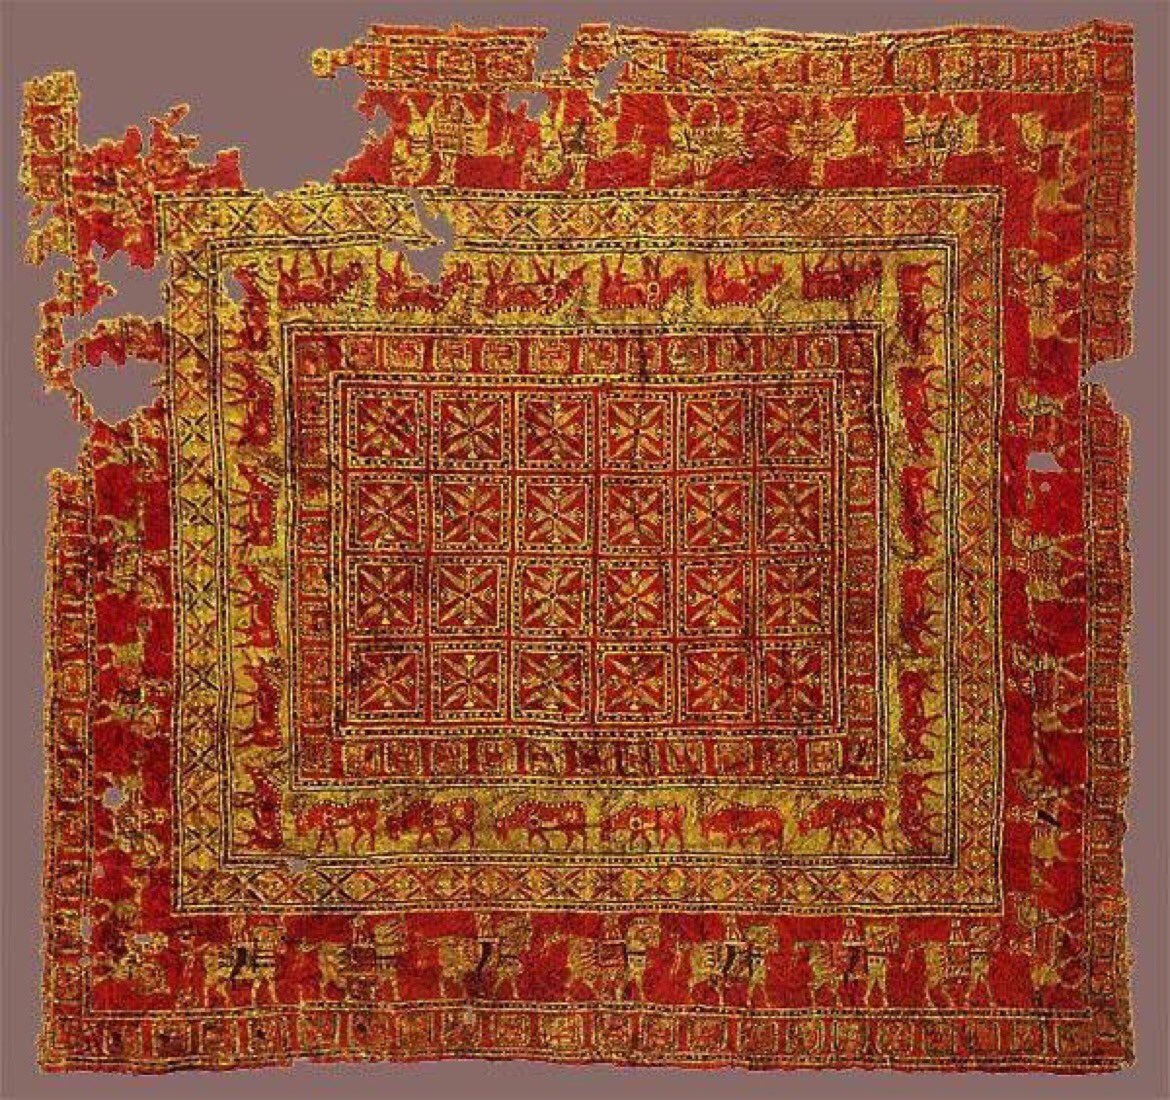 Pazyryk Carpet - the oldest hand-knotted oriental rug known was excavated from the Altai Mountains in Siberia in 1948. It was discovered in the grave of the prince of Altai near Pazyryk, 5400ft above sea level, and clearly shows how well hand-knotted rugs were produced thousands